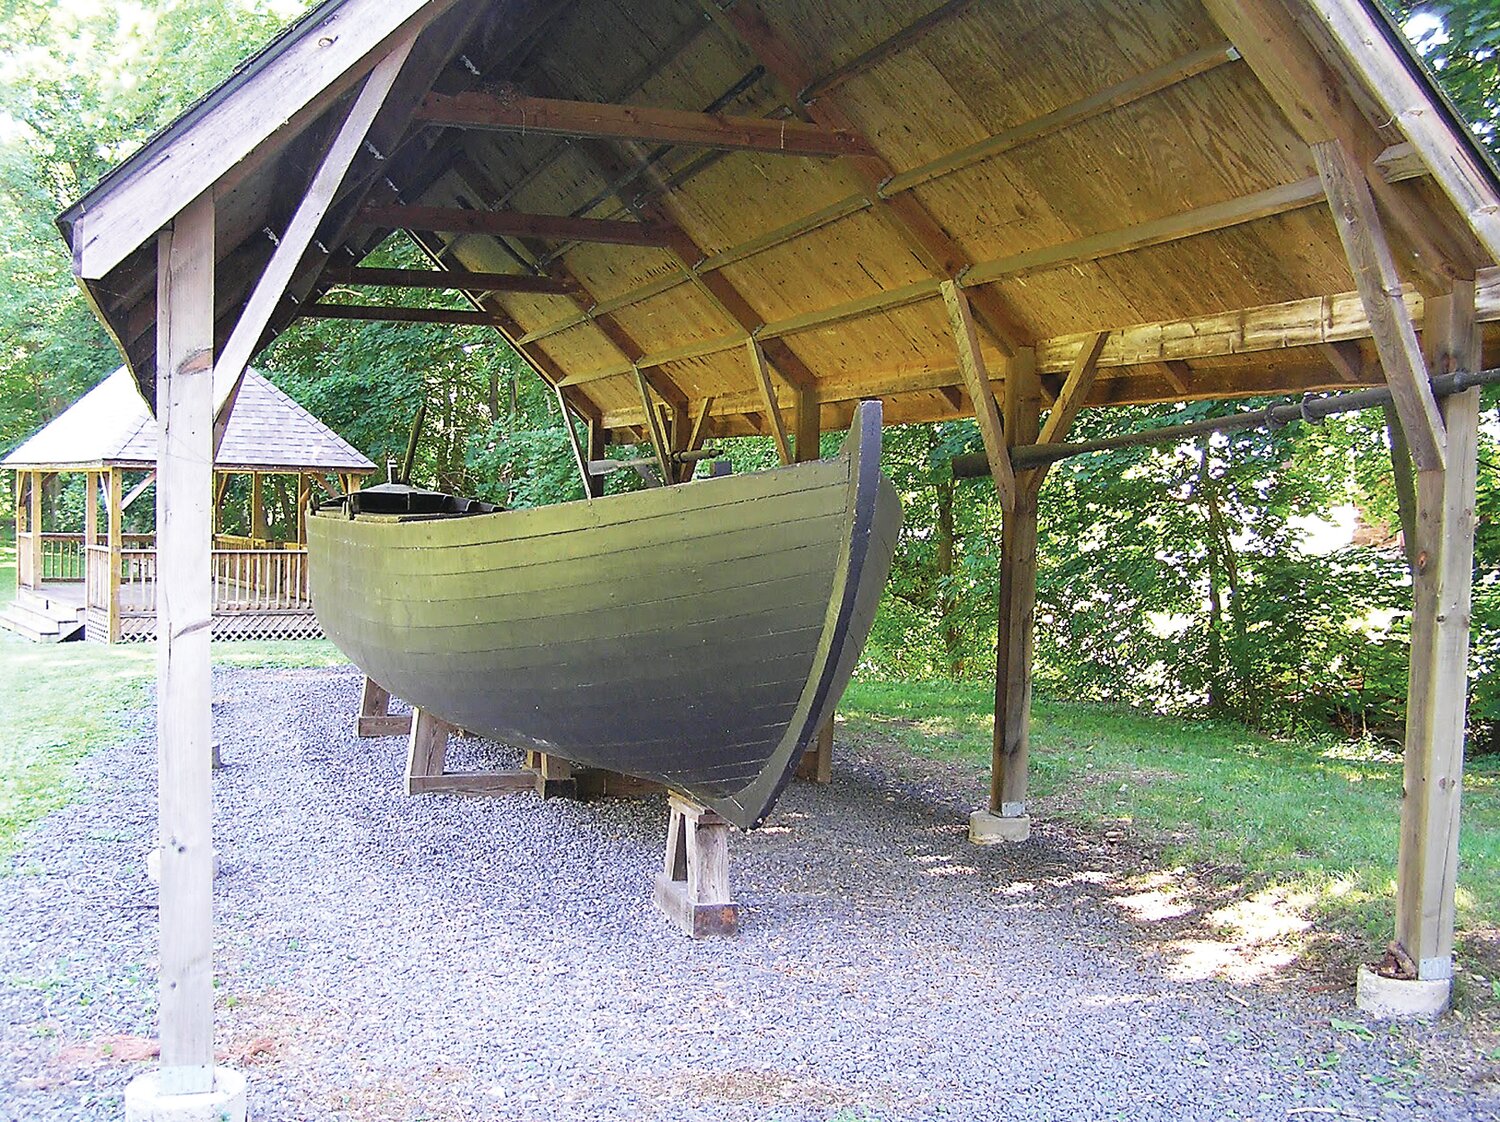 Beneath a pavilion on the village green in Durham sits a full-sized replica of one of the famous Durham boats that traveled the Delaware River from Durham to Philadelphia and helped General George Washington and his men famously cross the river on Christmas Night to attack the British.